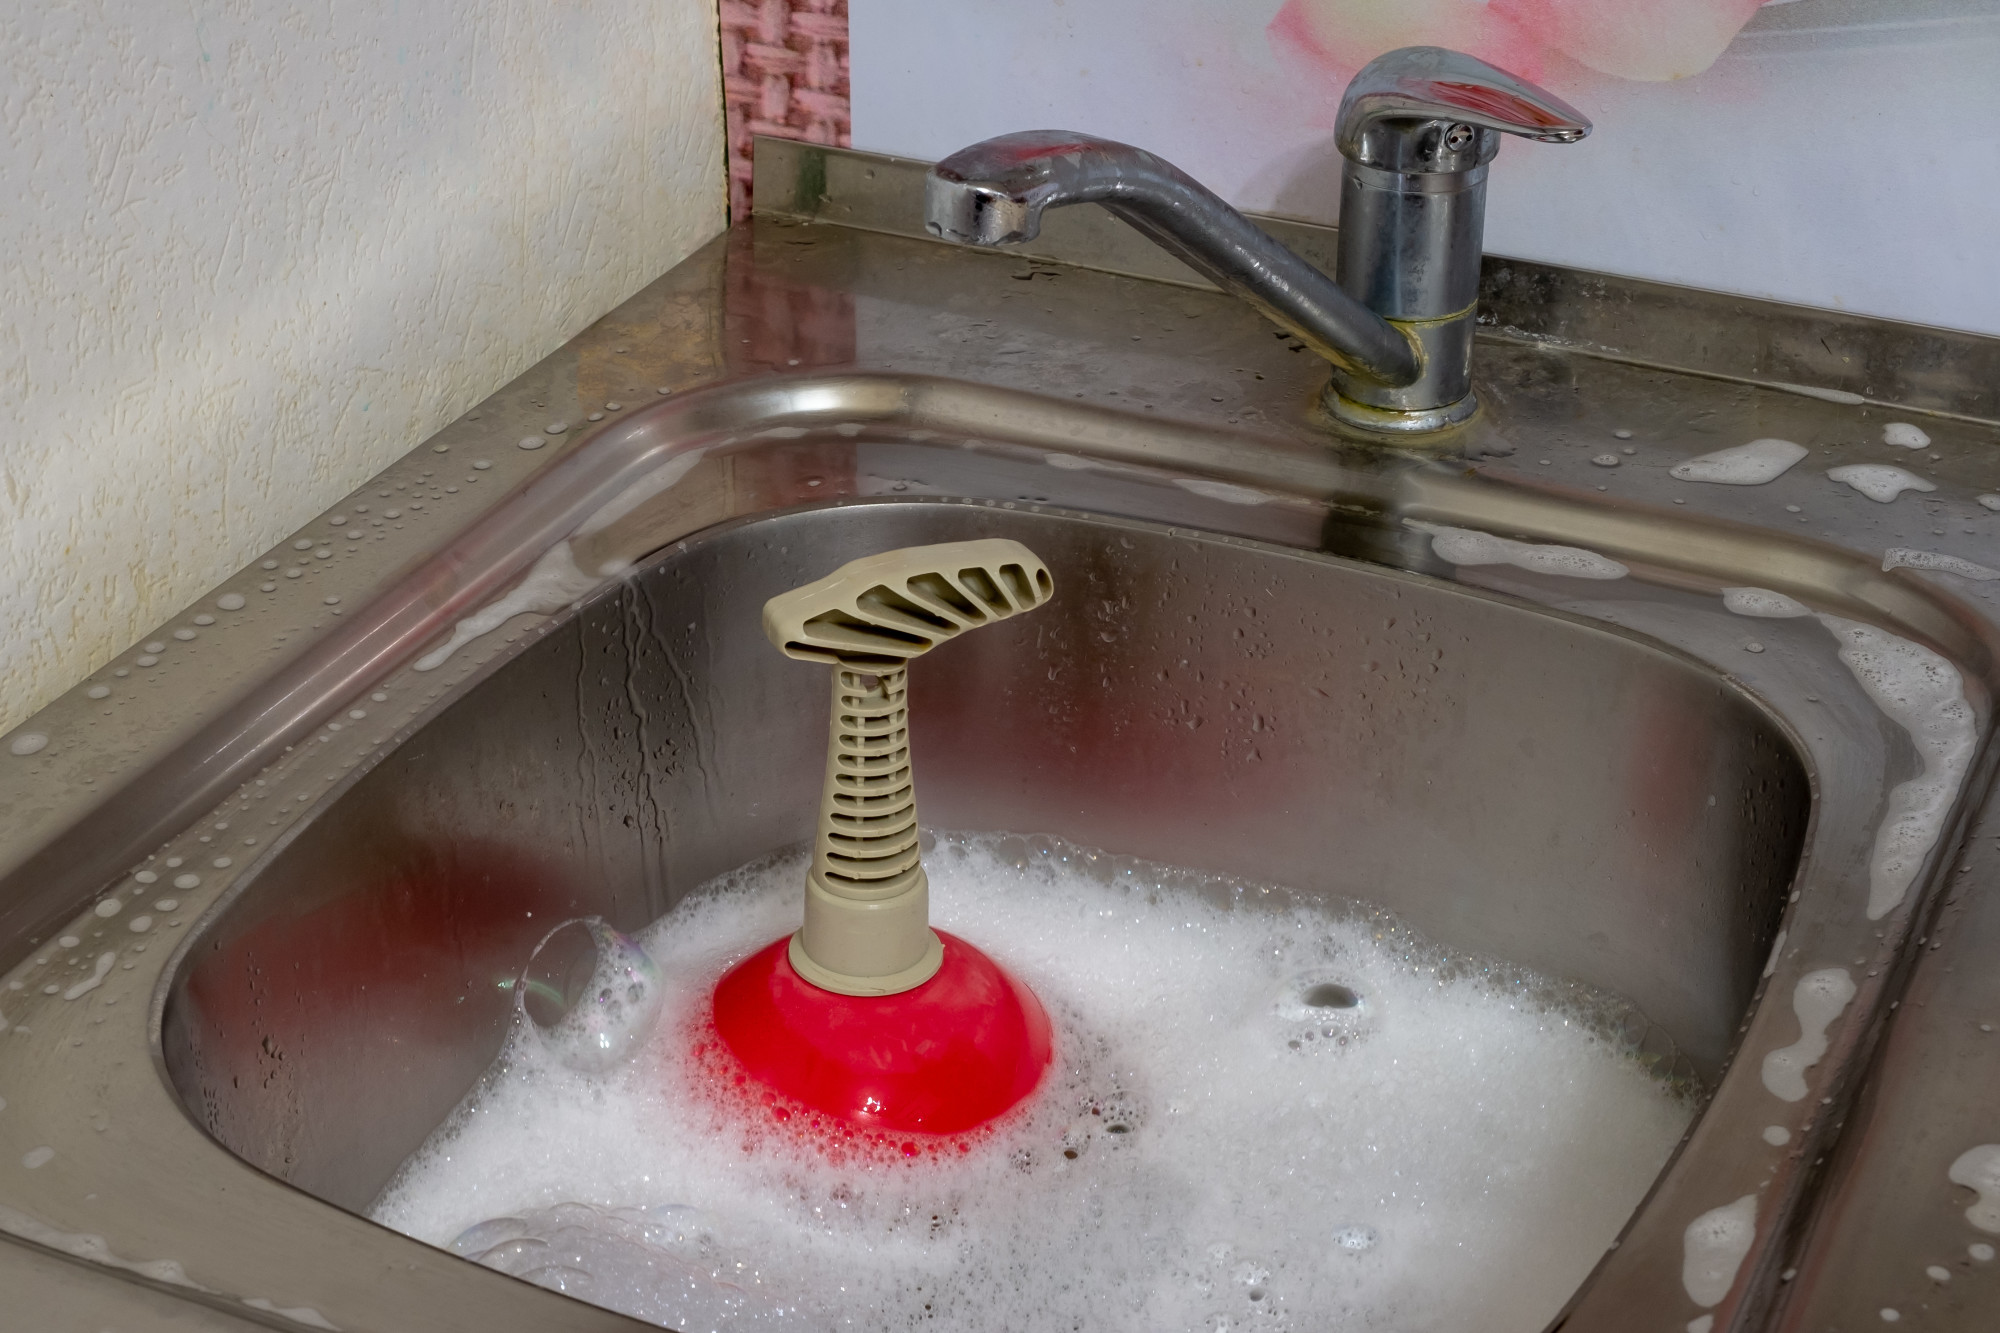 7 Easy Ways to Unclog Drains You Need to Know